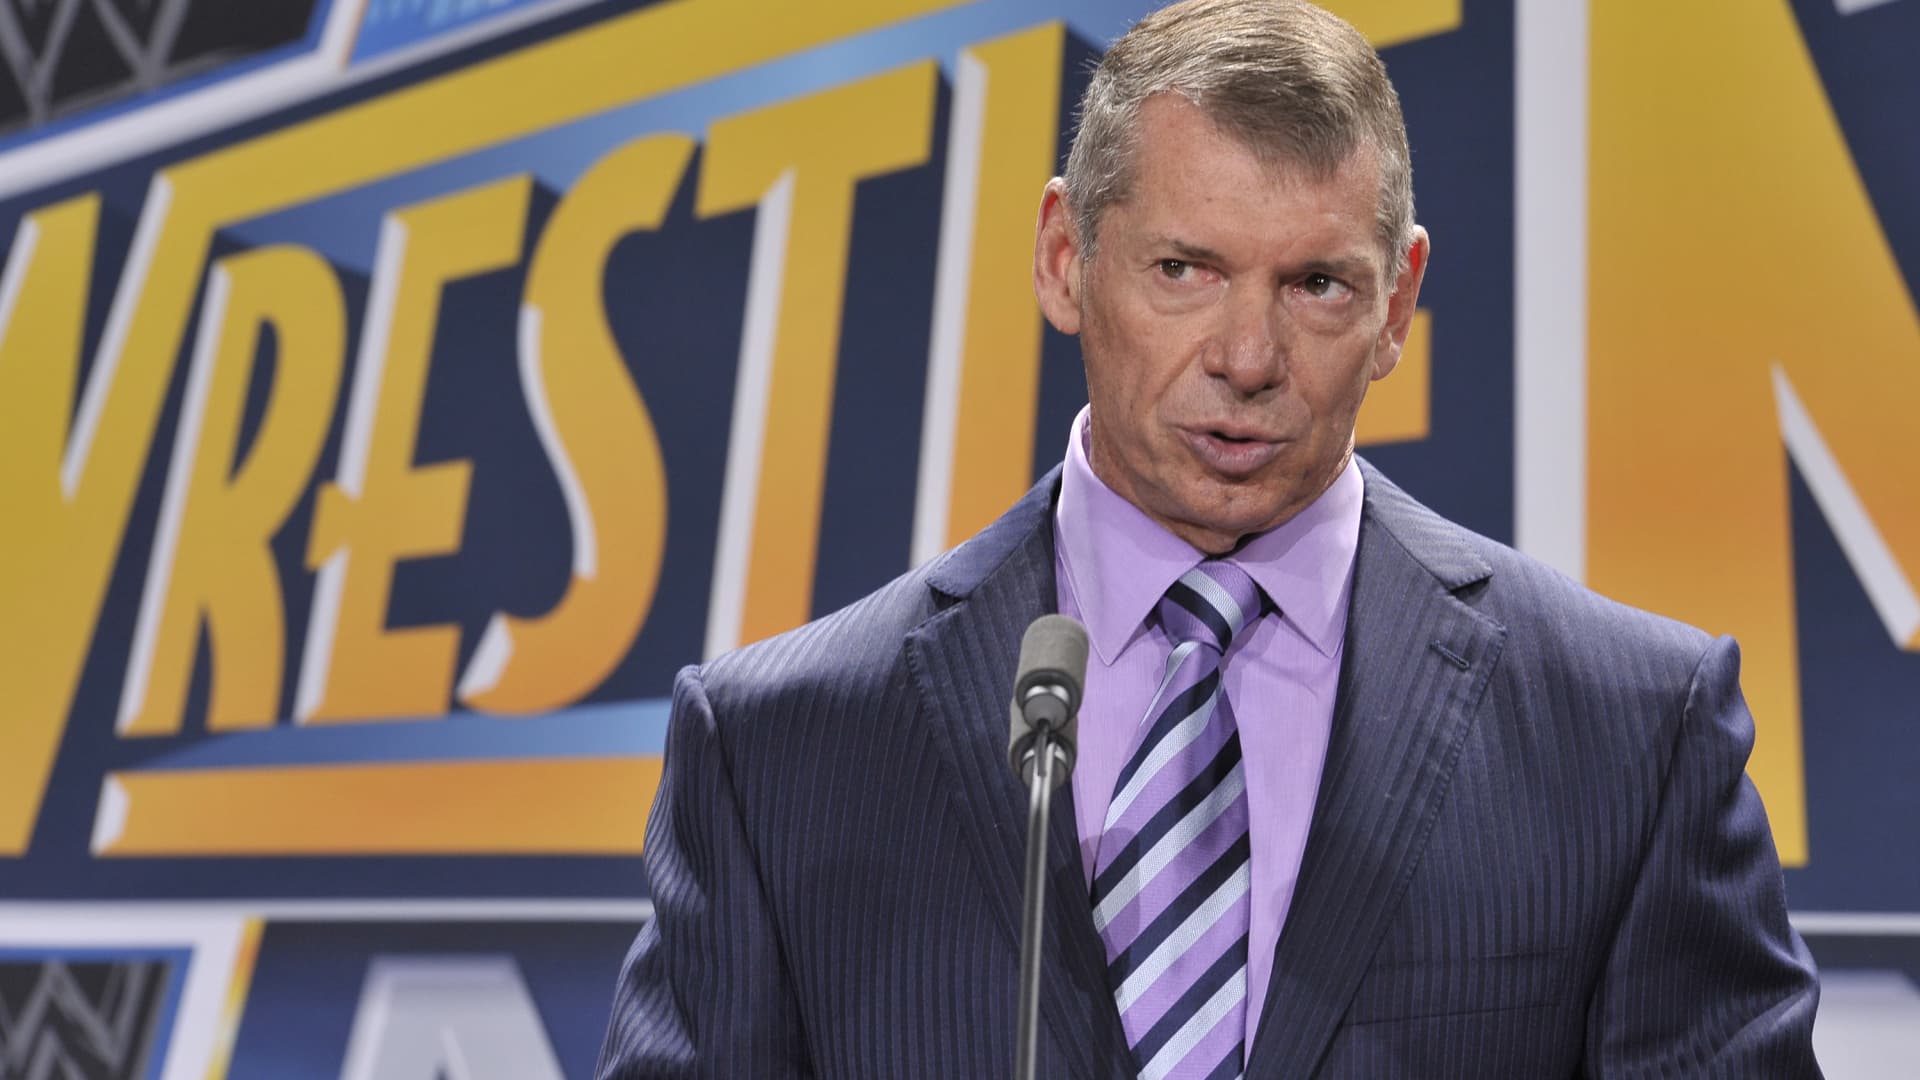 WWE’s Vince McMahon paid more than $12 million to settle sexual misconduct allegations, report says